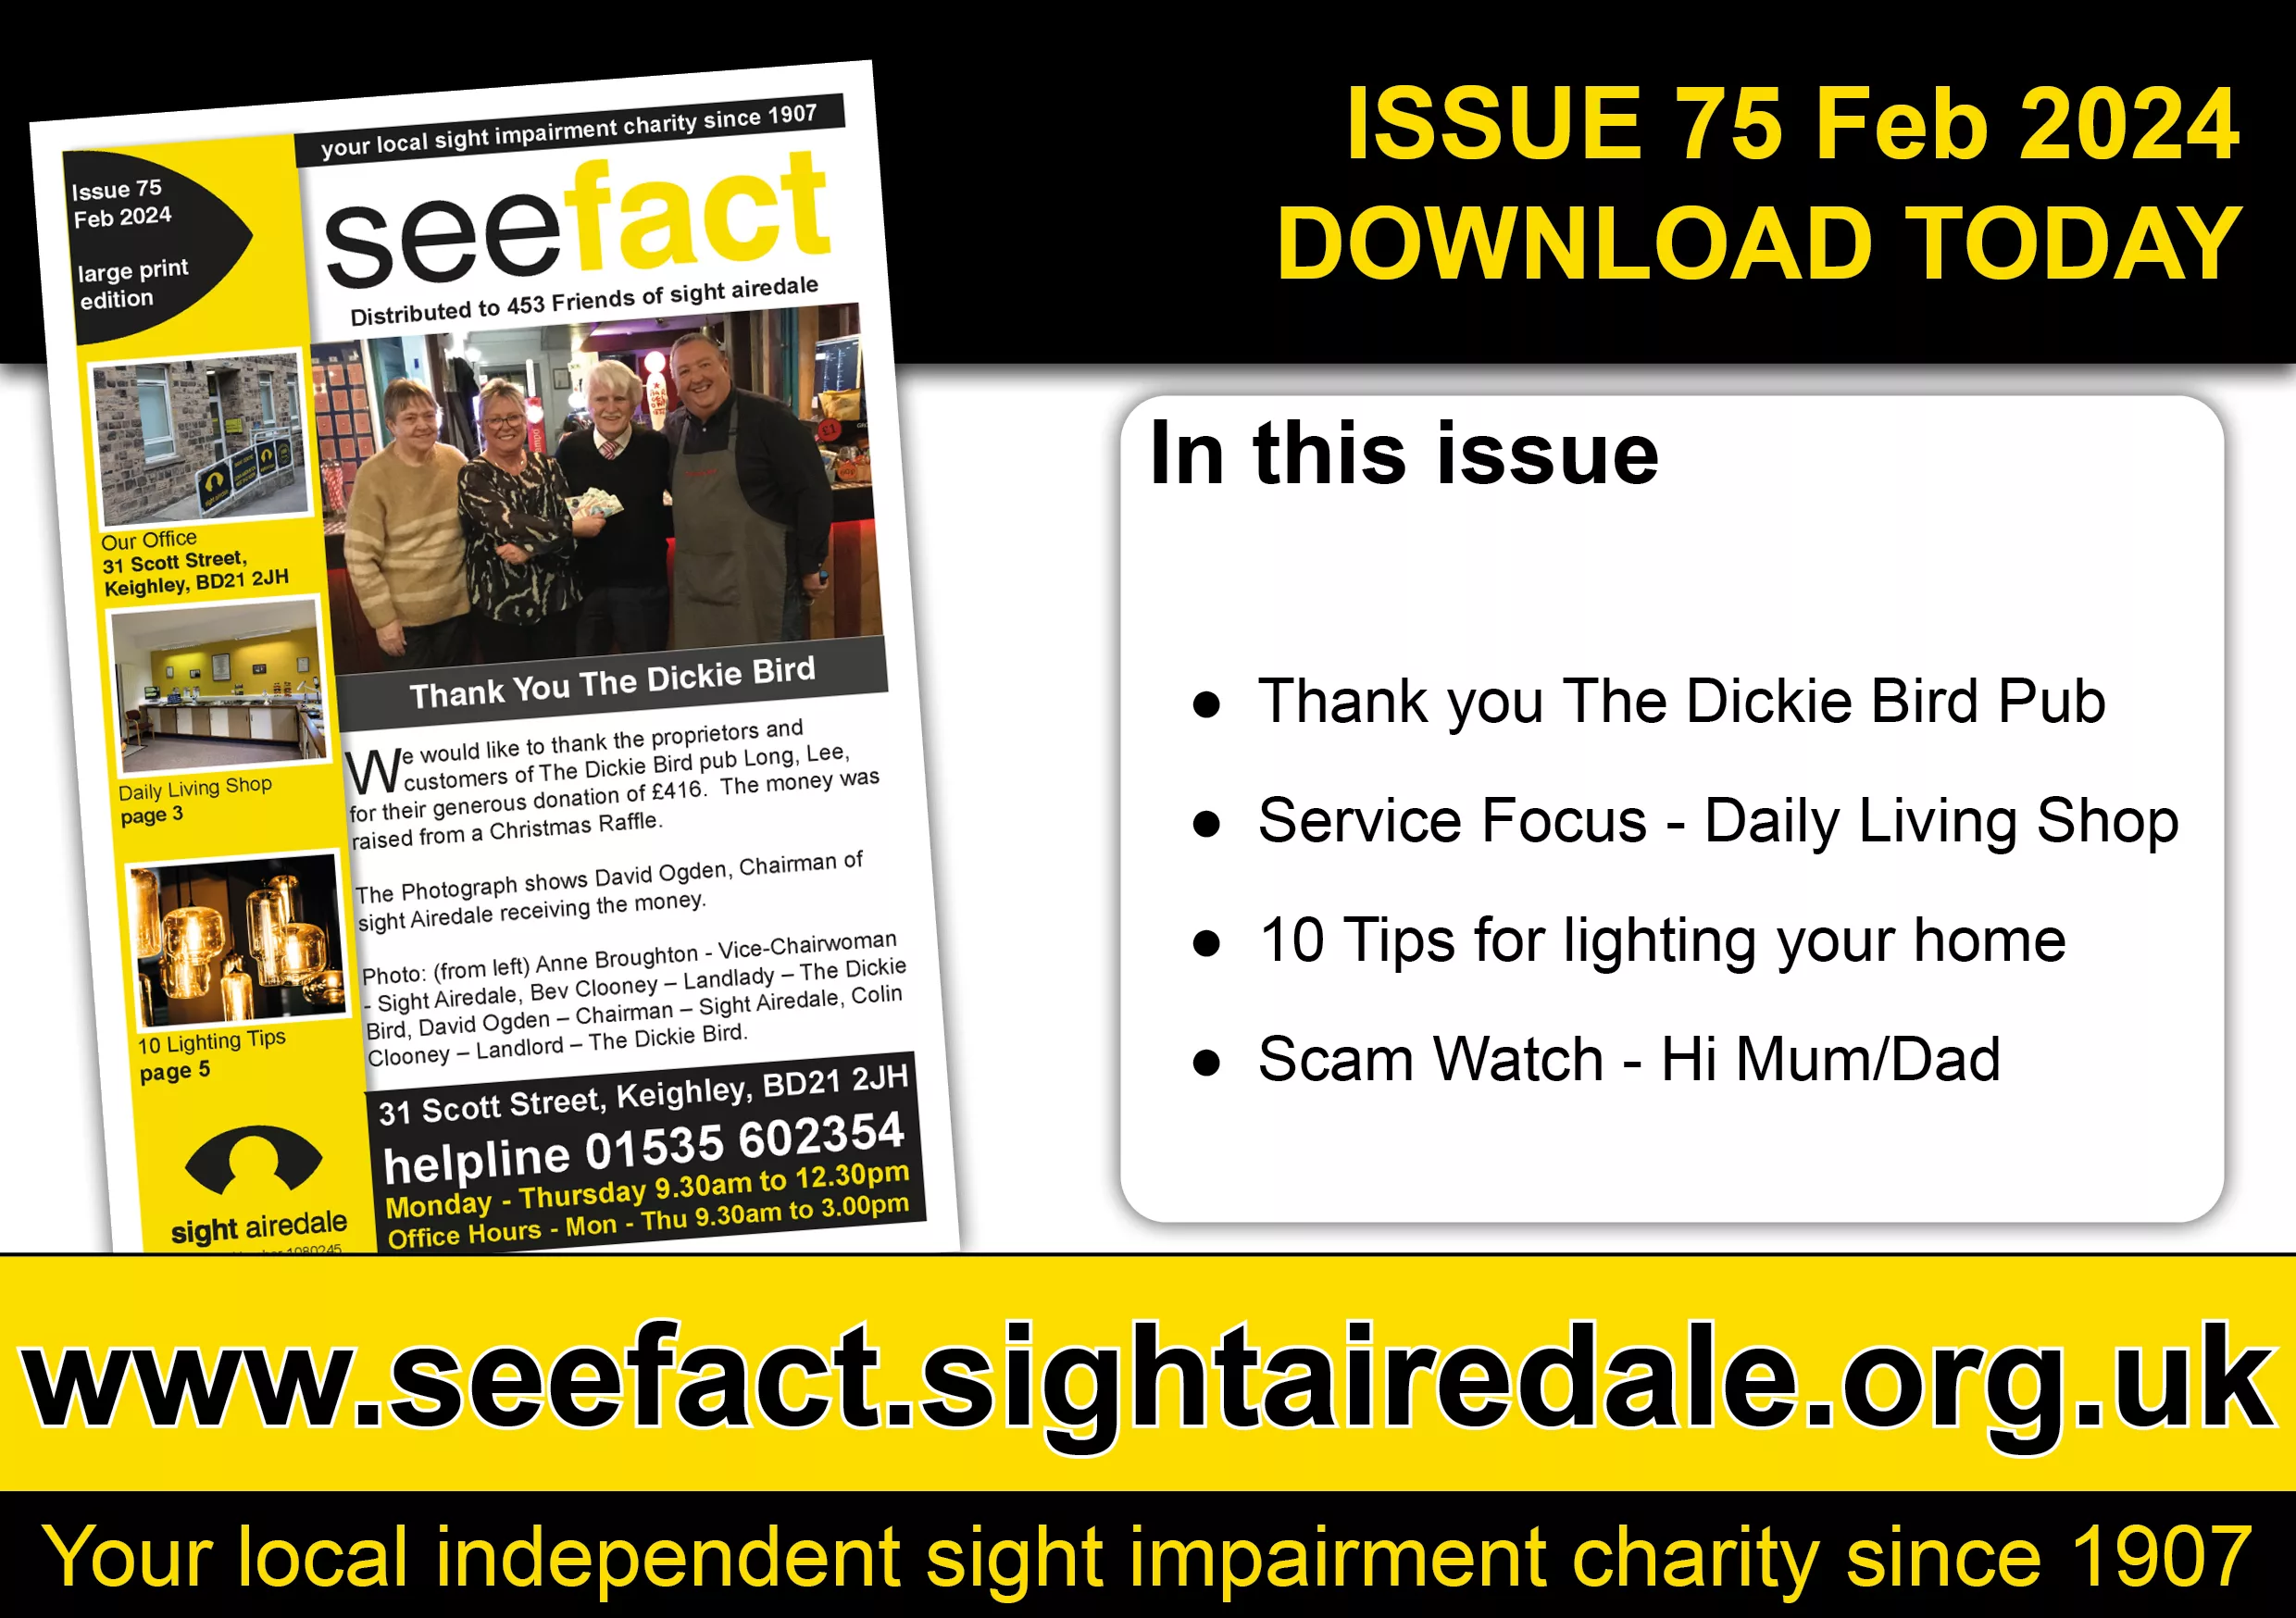 SeeFact Feb 2024 - In this issue Thank you the Dickie Bird, Service Fucus - Daily LIving SHop, 10 Tips for lighting your home - Scam Watch Hi Mum Dad